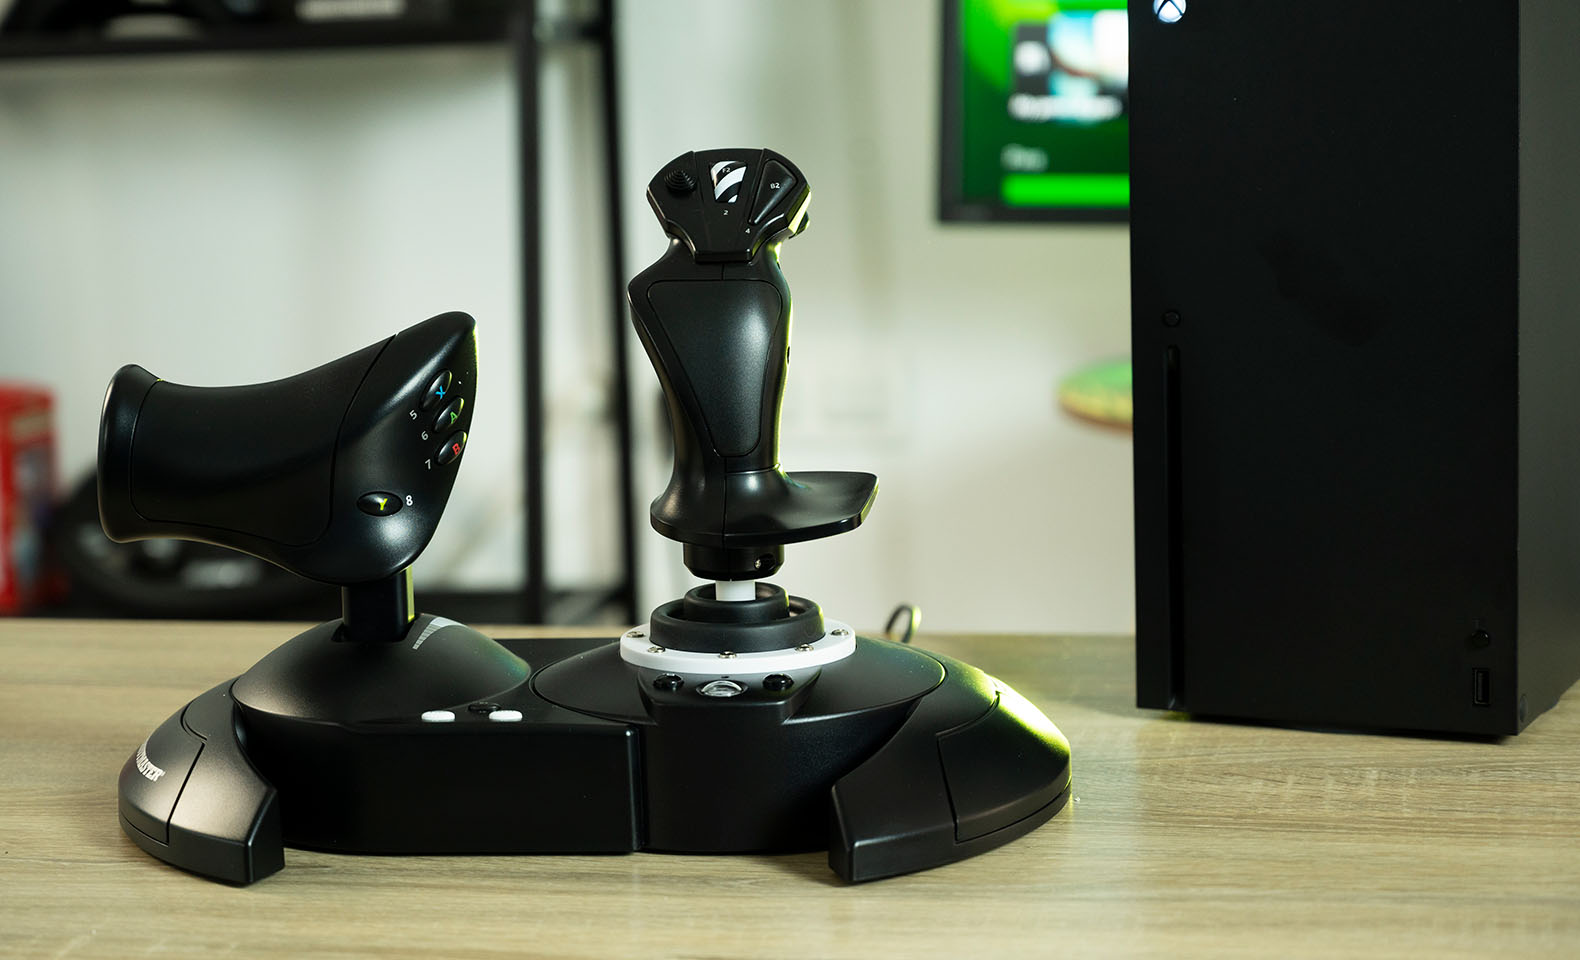 How To Use A Flight Stick On Xbox One | Robots.net